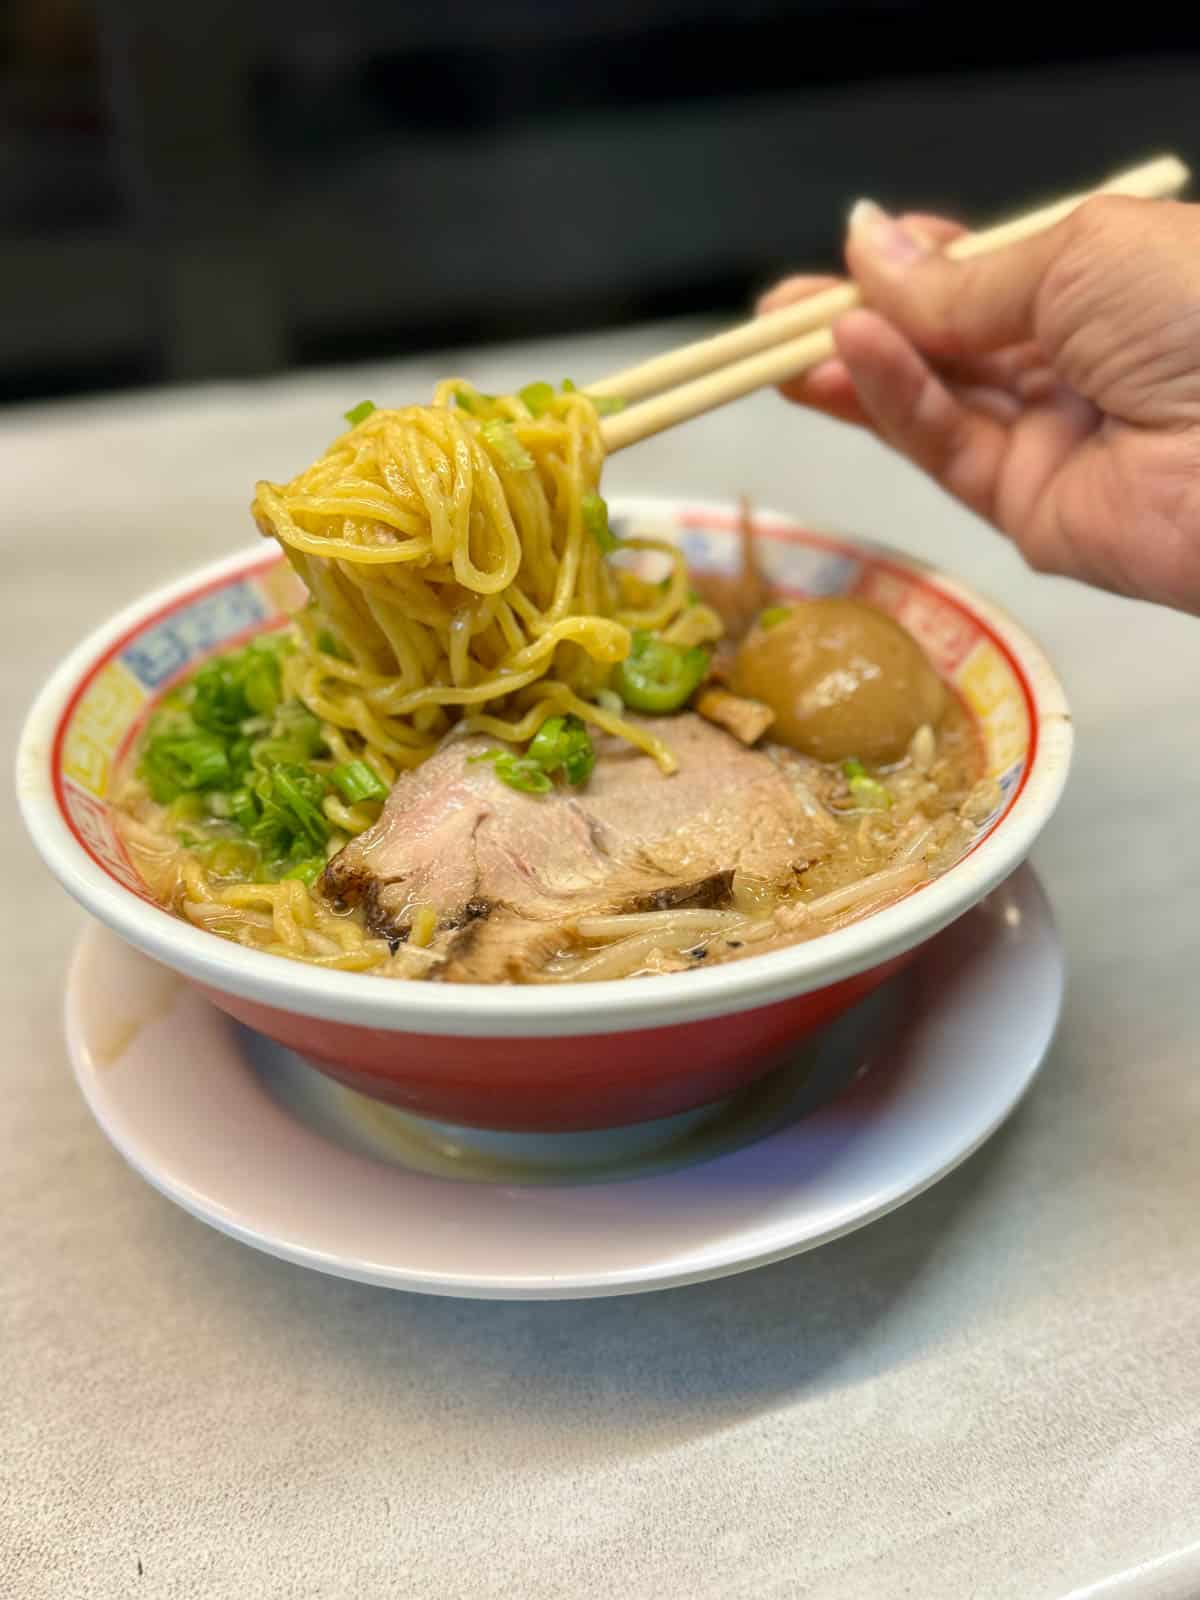 Bowl of ramen with hand holding noodles with chopsticks.